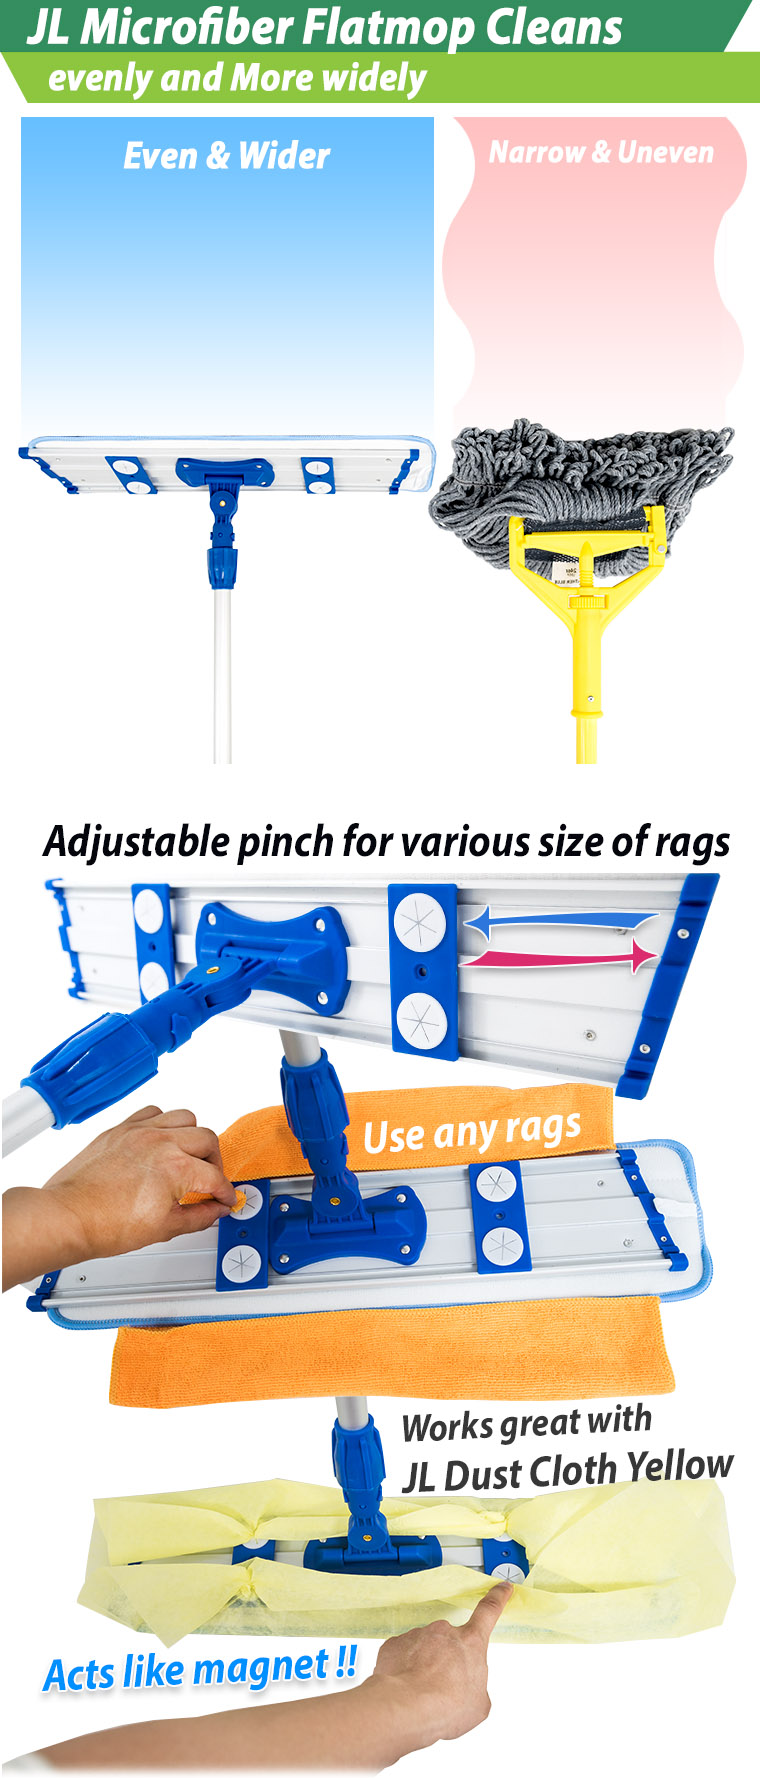 JL Microfiber Flatmop Cleans evenly and More widely. Even & Wider. Narrow & Uneven. Adjustable pinch for various size of rags. Use any rags. Works great with JL Dust Cloth Yellow. Acts like magnet !!